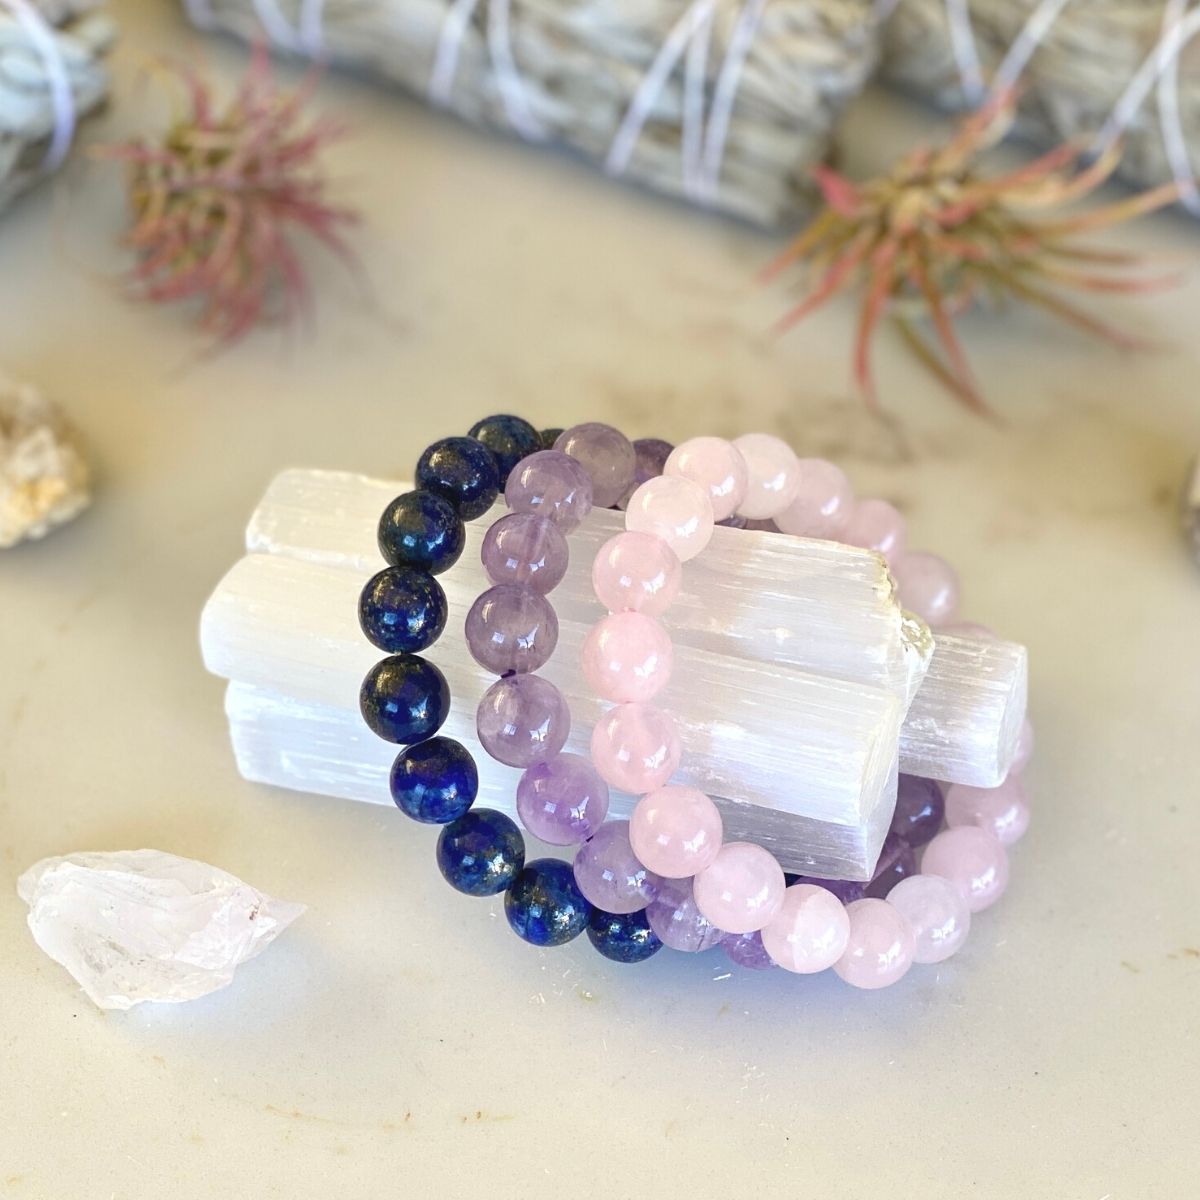 Trauma Healing Bracelet Stack. What is trauma? Look it up in the dictionary, and you’ll find that it’s “a deeply distressing or disturbing experience.” And you know what? It’s painfully common. Wear this bracelet stack to assist you on your trauma healing journey!